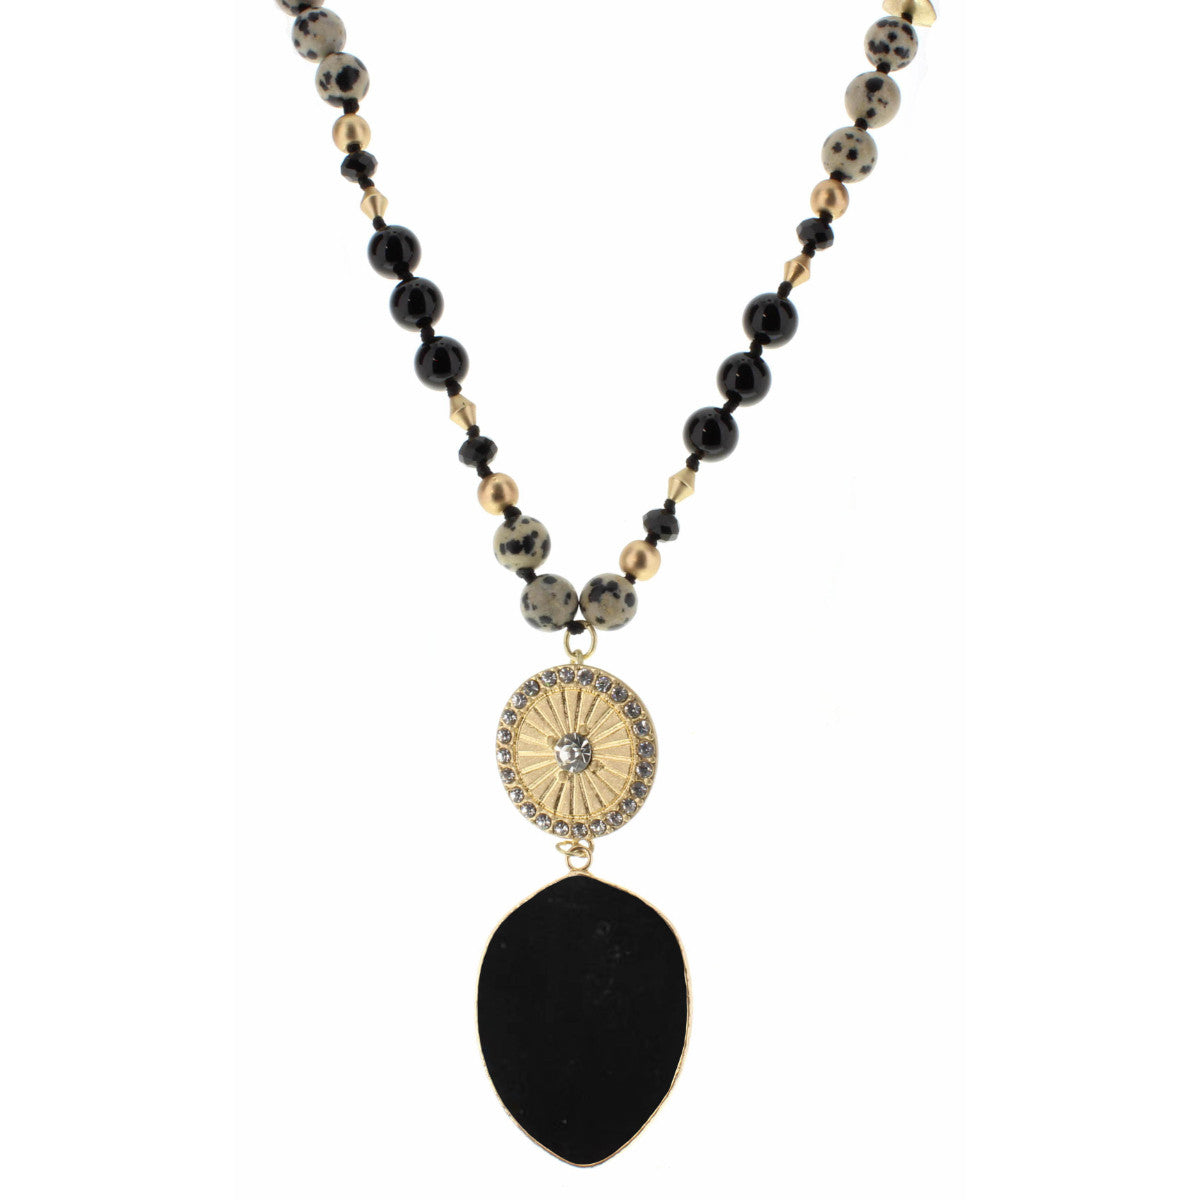 30" Jet, Multi Beaded Body with Gold Ray Medallion and Jet Agate Drop Necklace